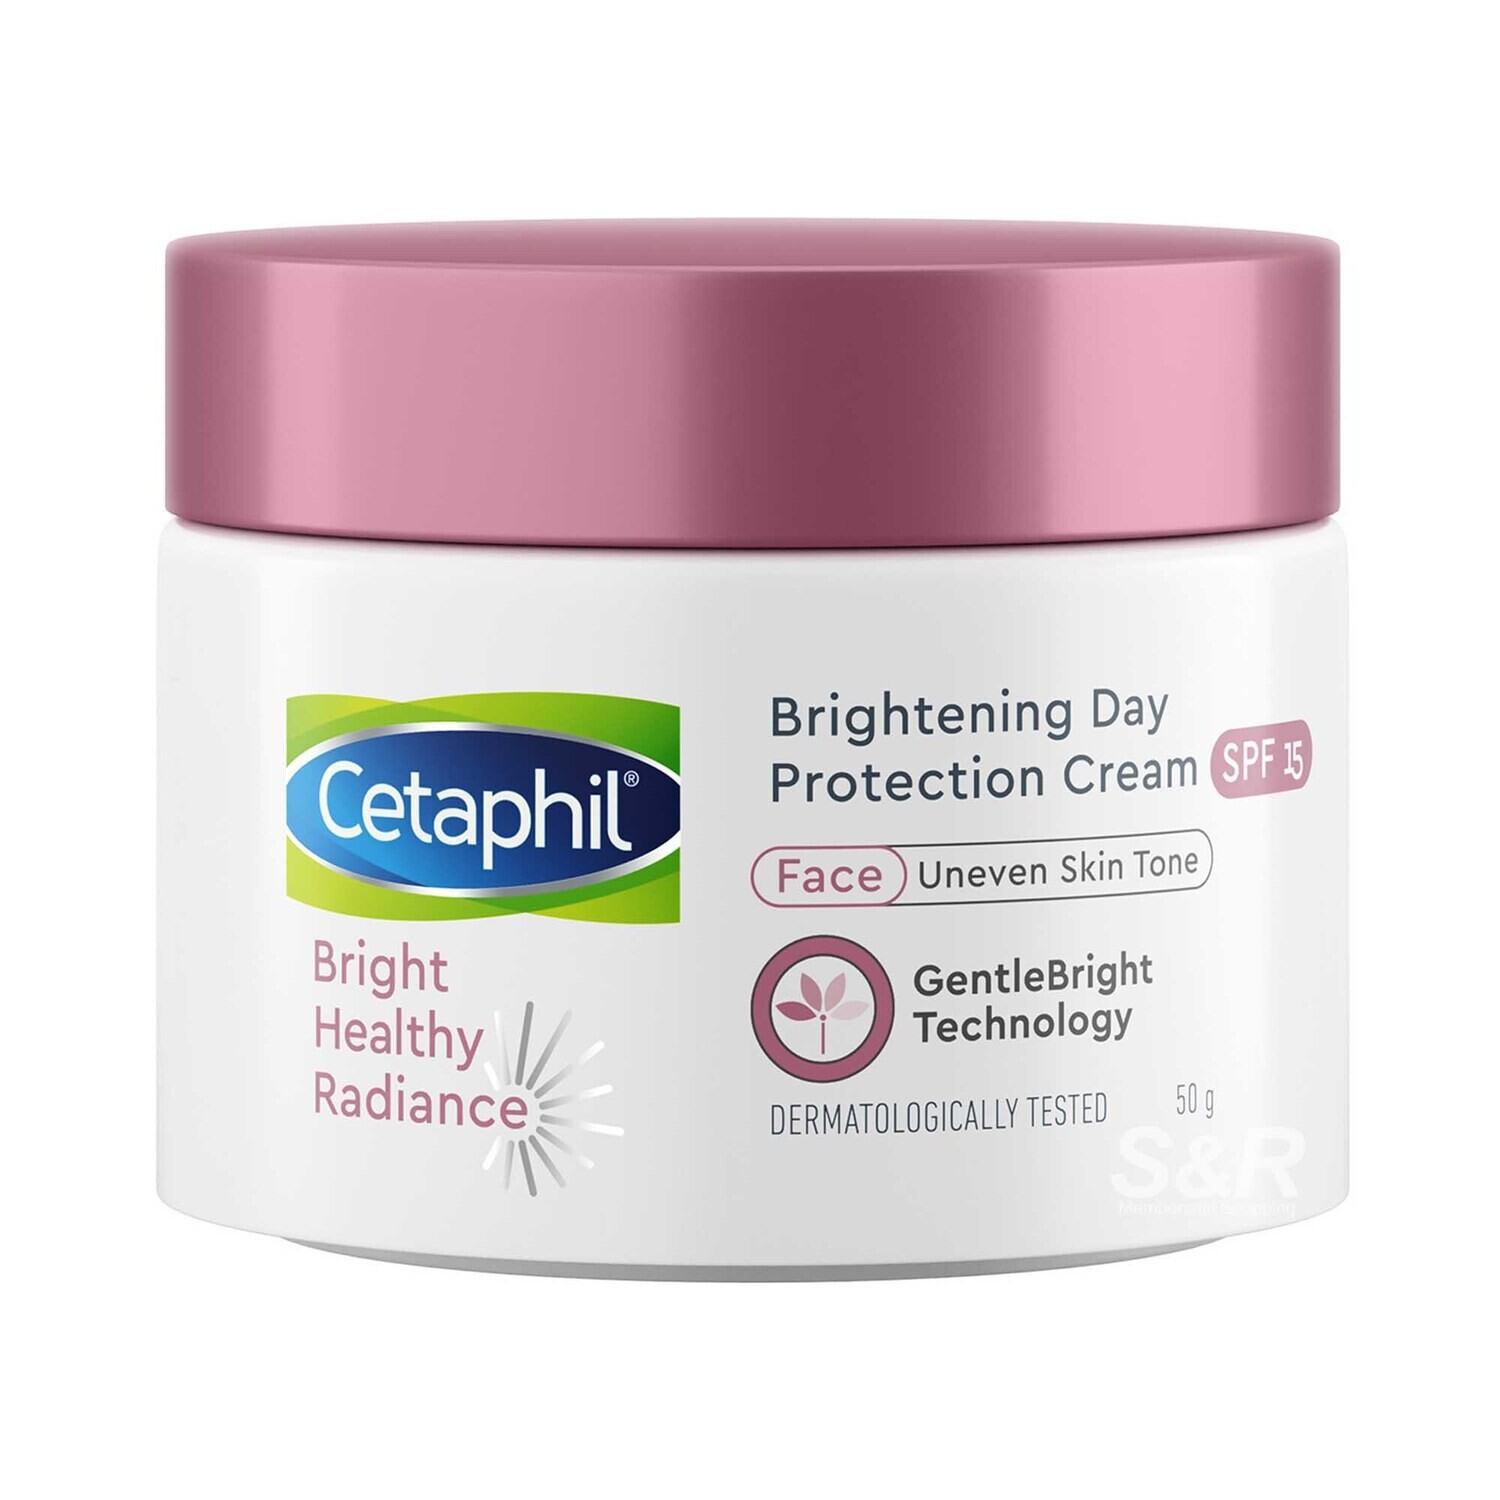 Cetaphil Bright Healthy Radiance Brightening Day Protection Cream SPF 15